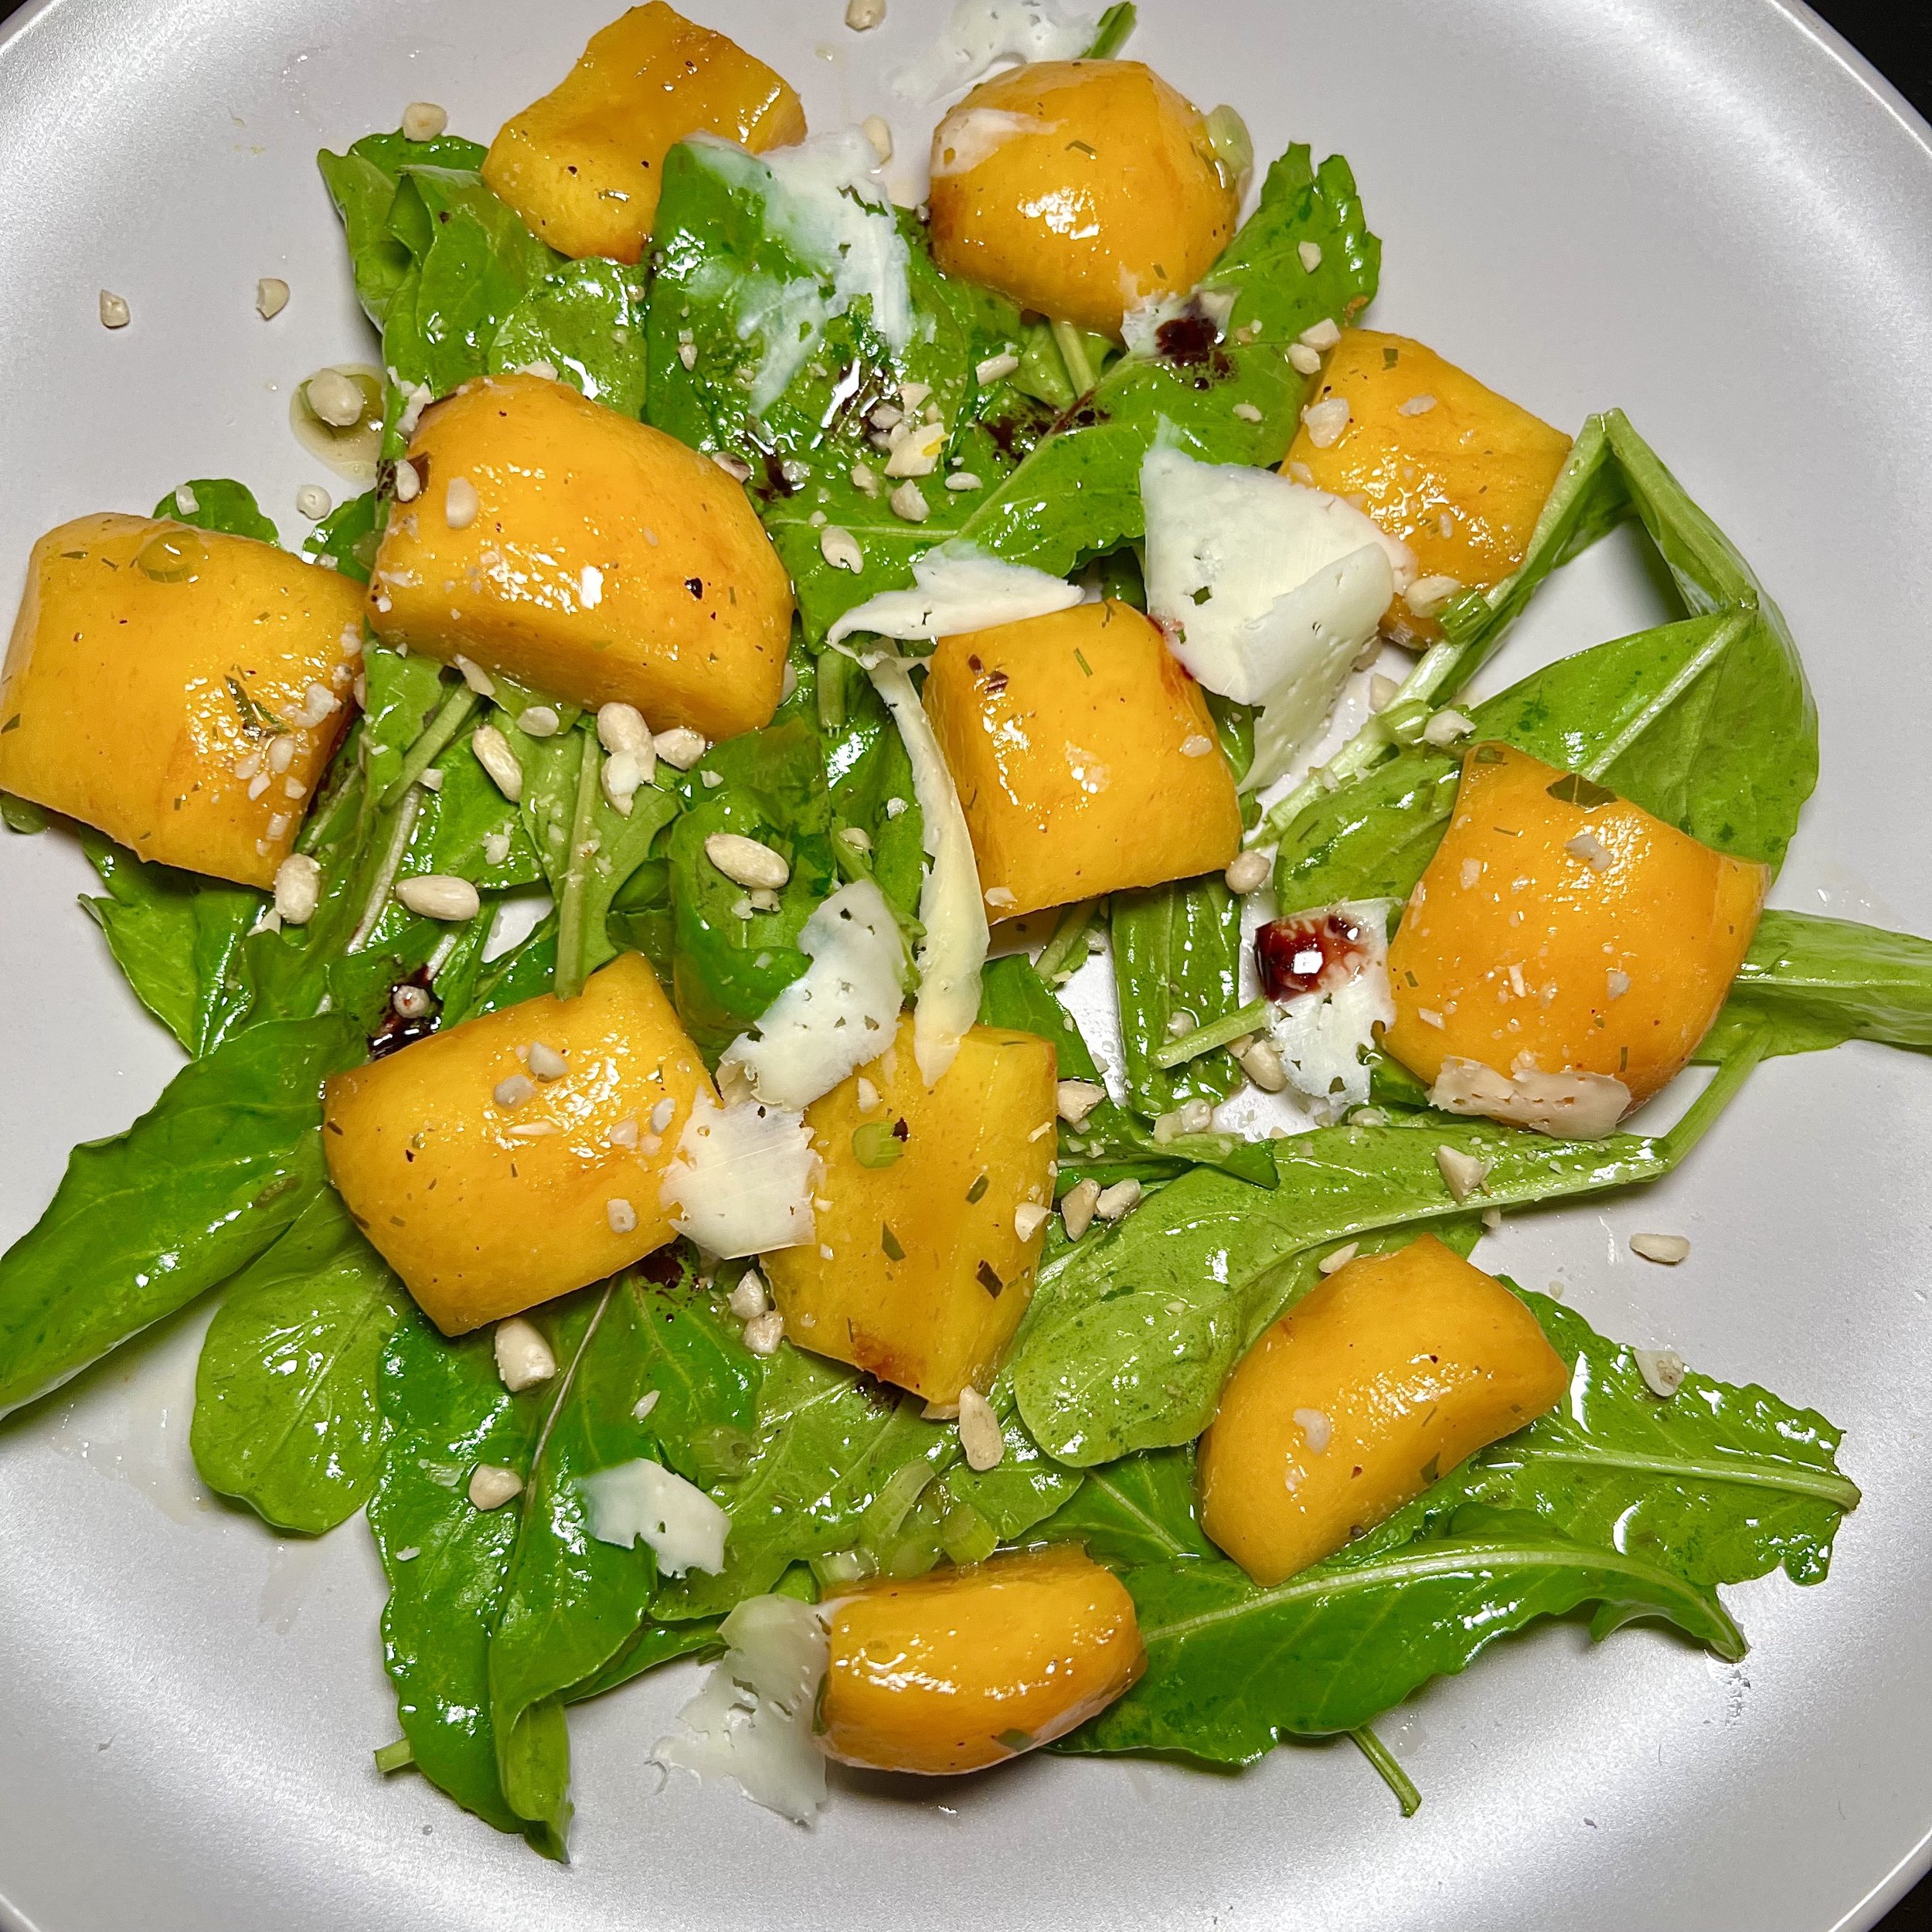 Peach Salad with Roasted Pine Nuts